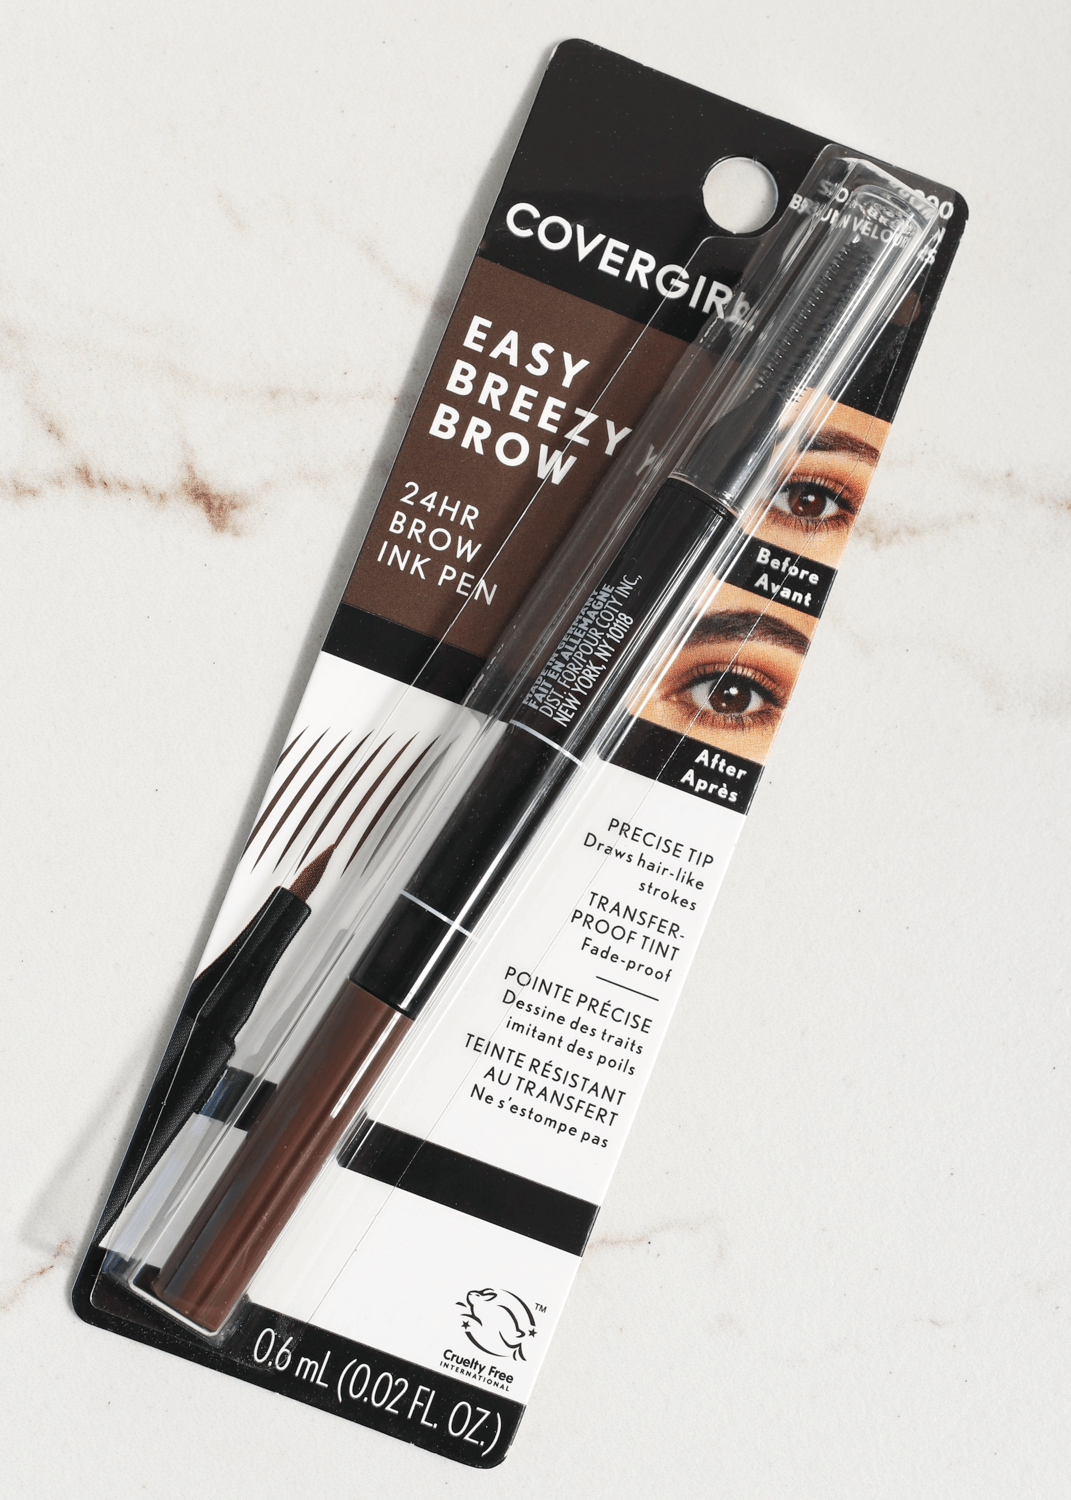 Easy brow all day Romanamx